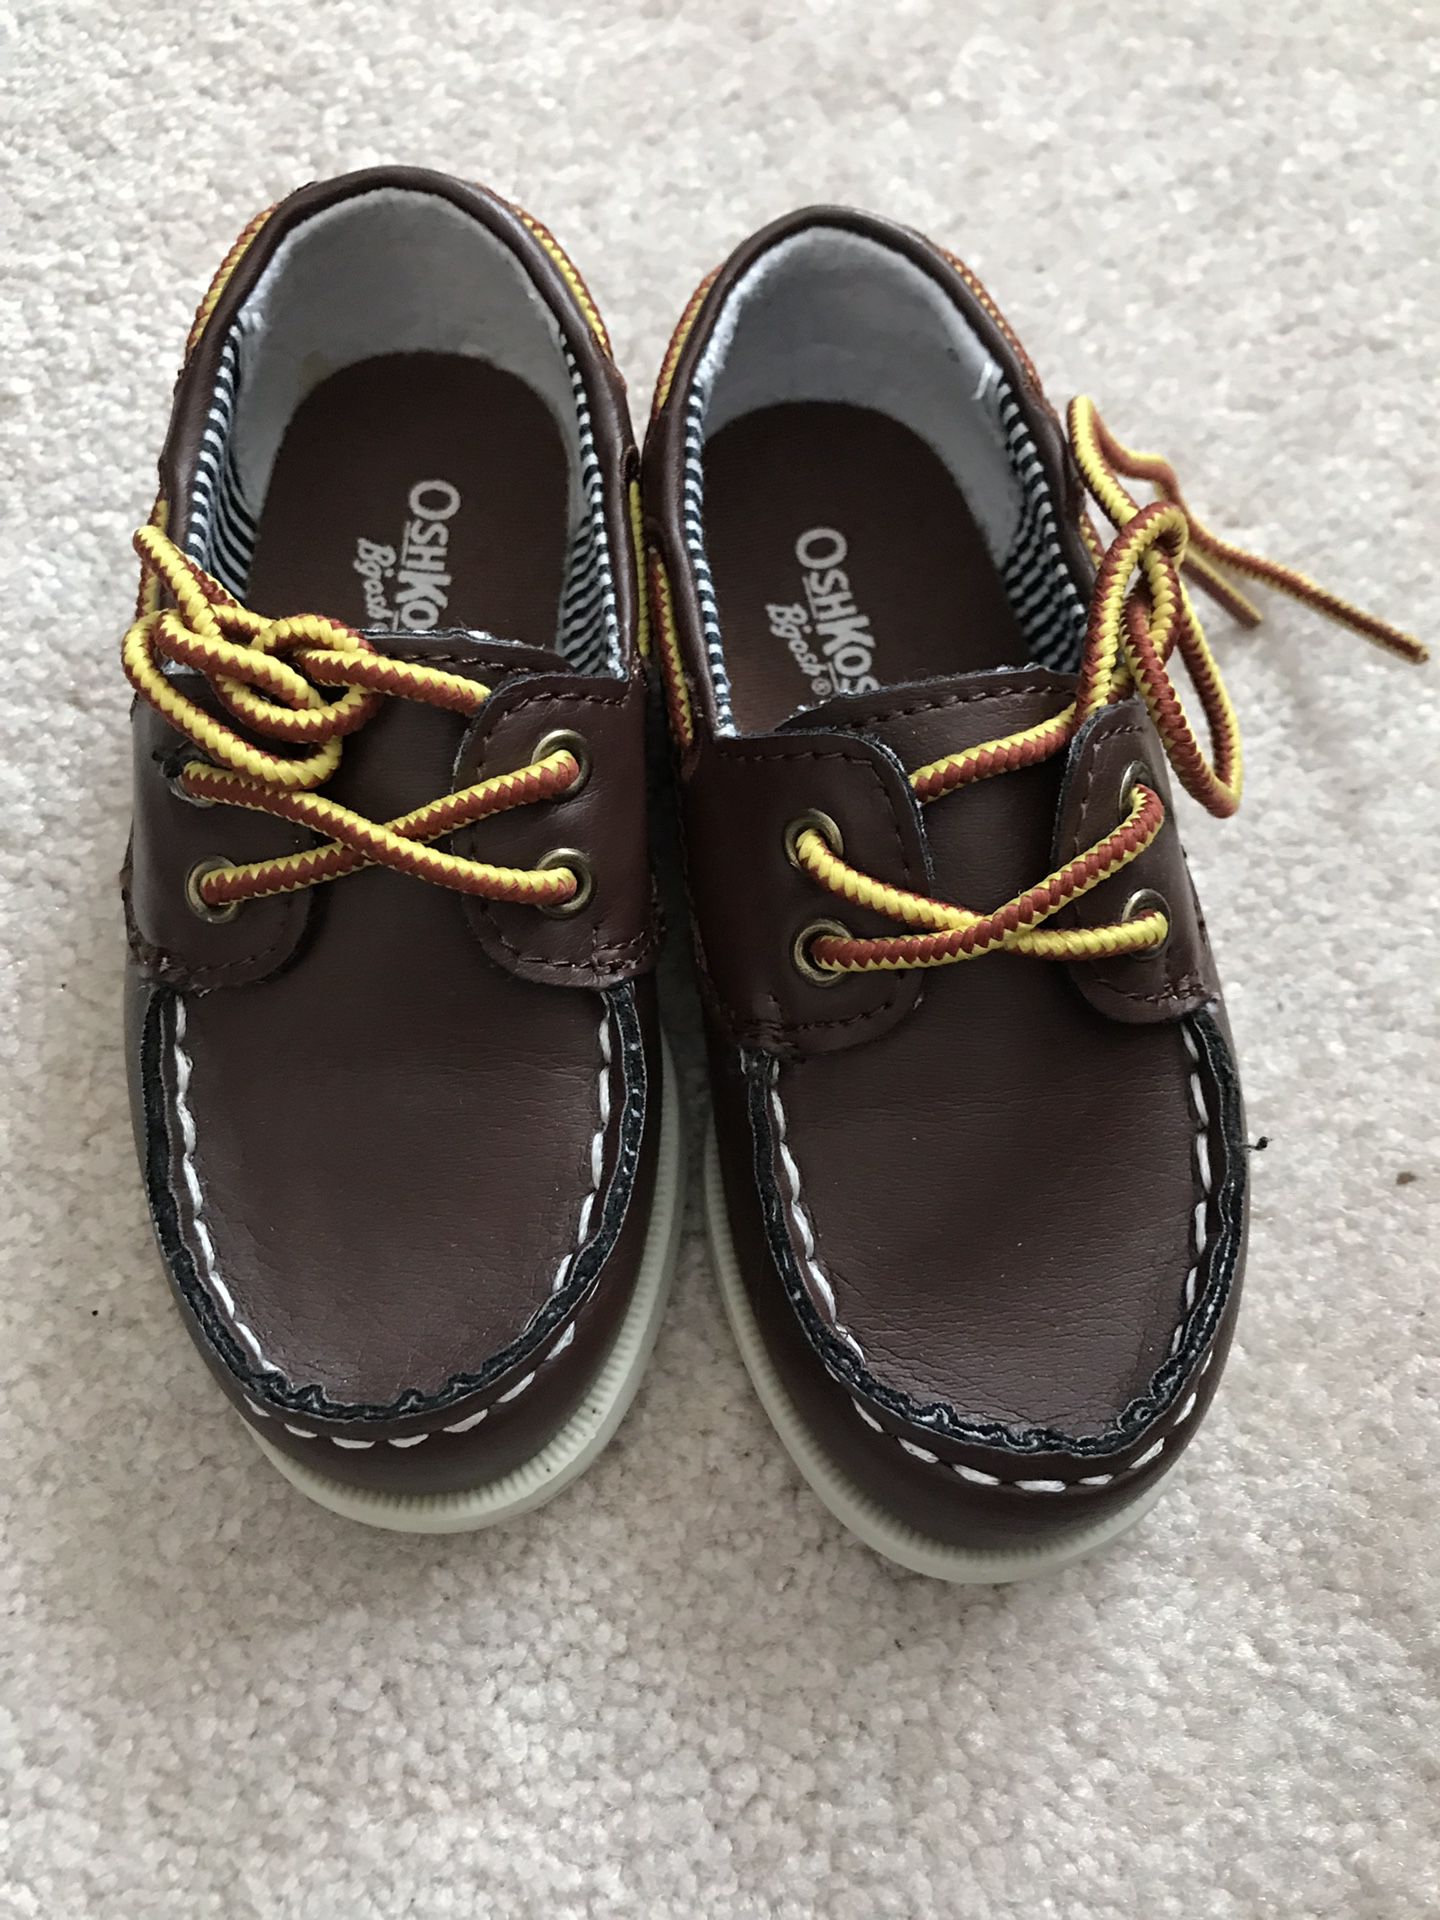 Boys shoes size 7 (toddler)